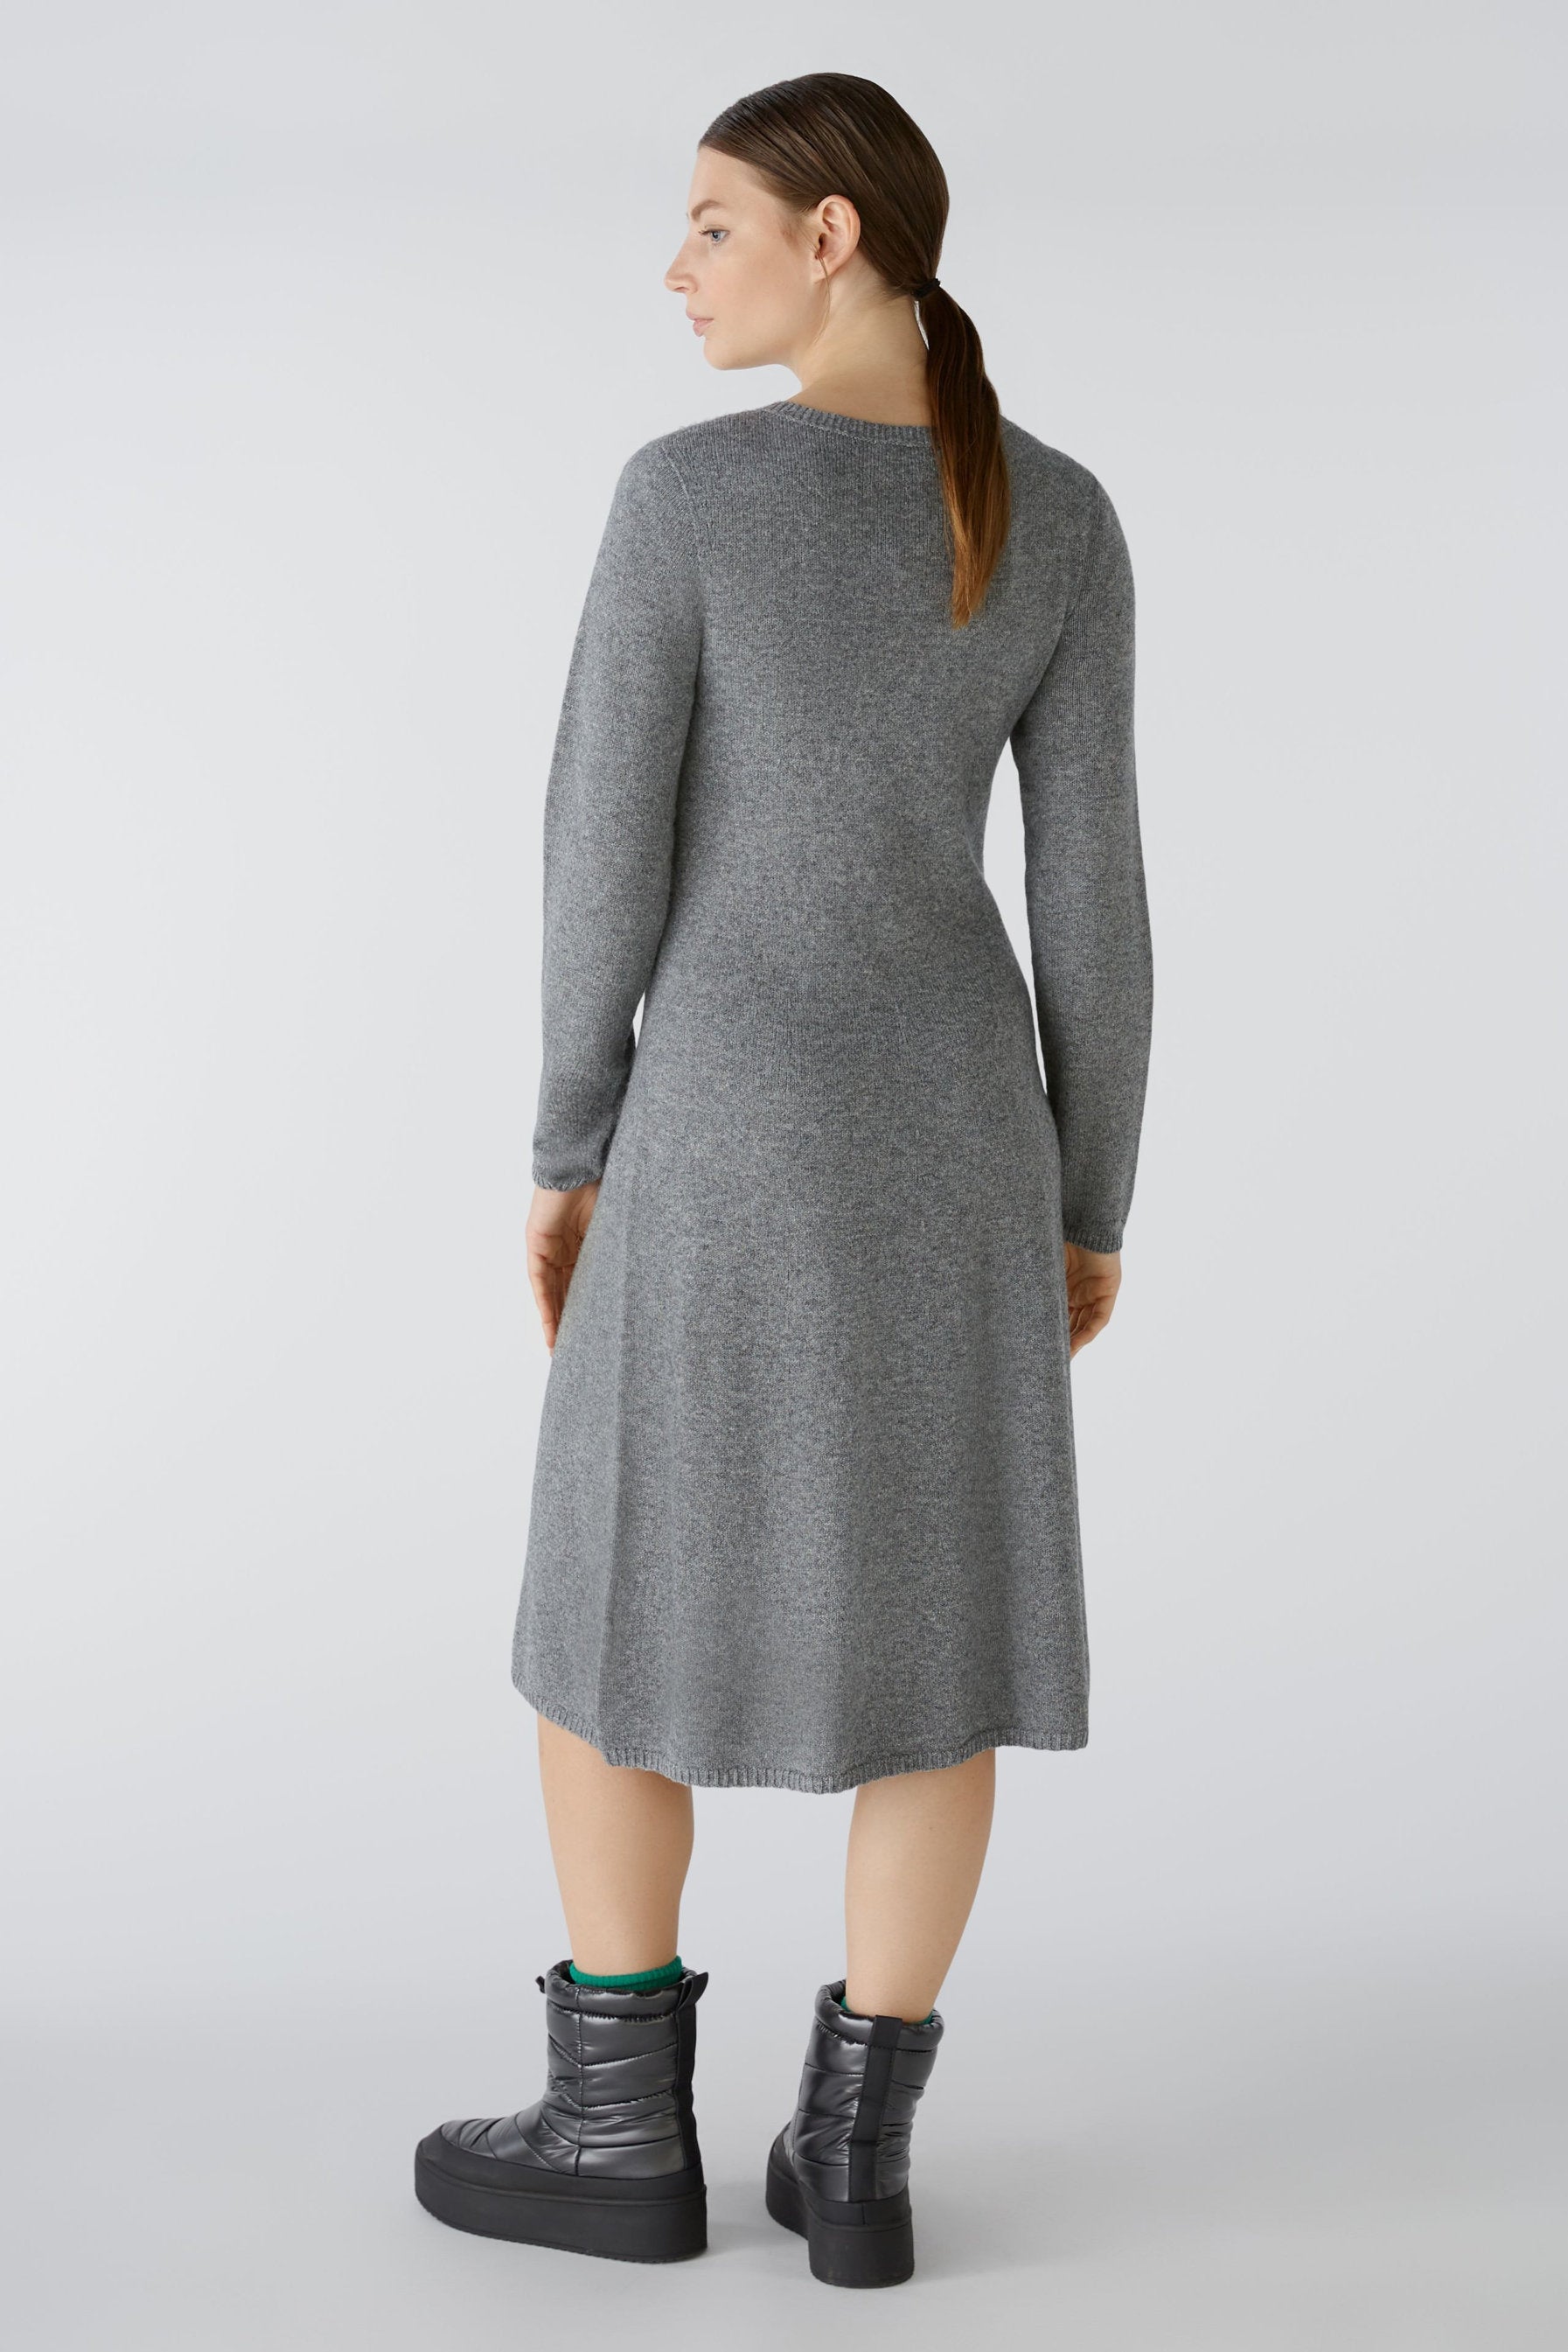 Knitted Dress Wool Blend With Modal_79699_9559_03